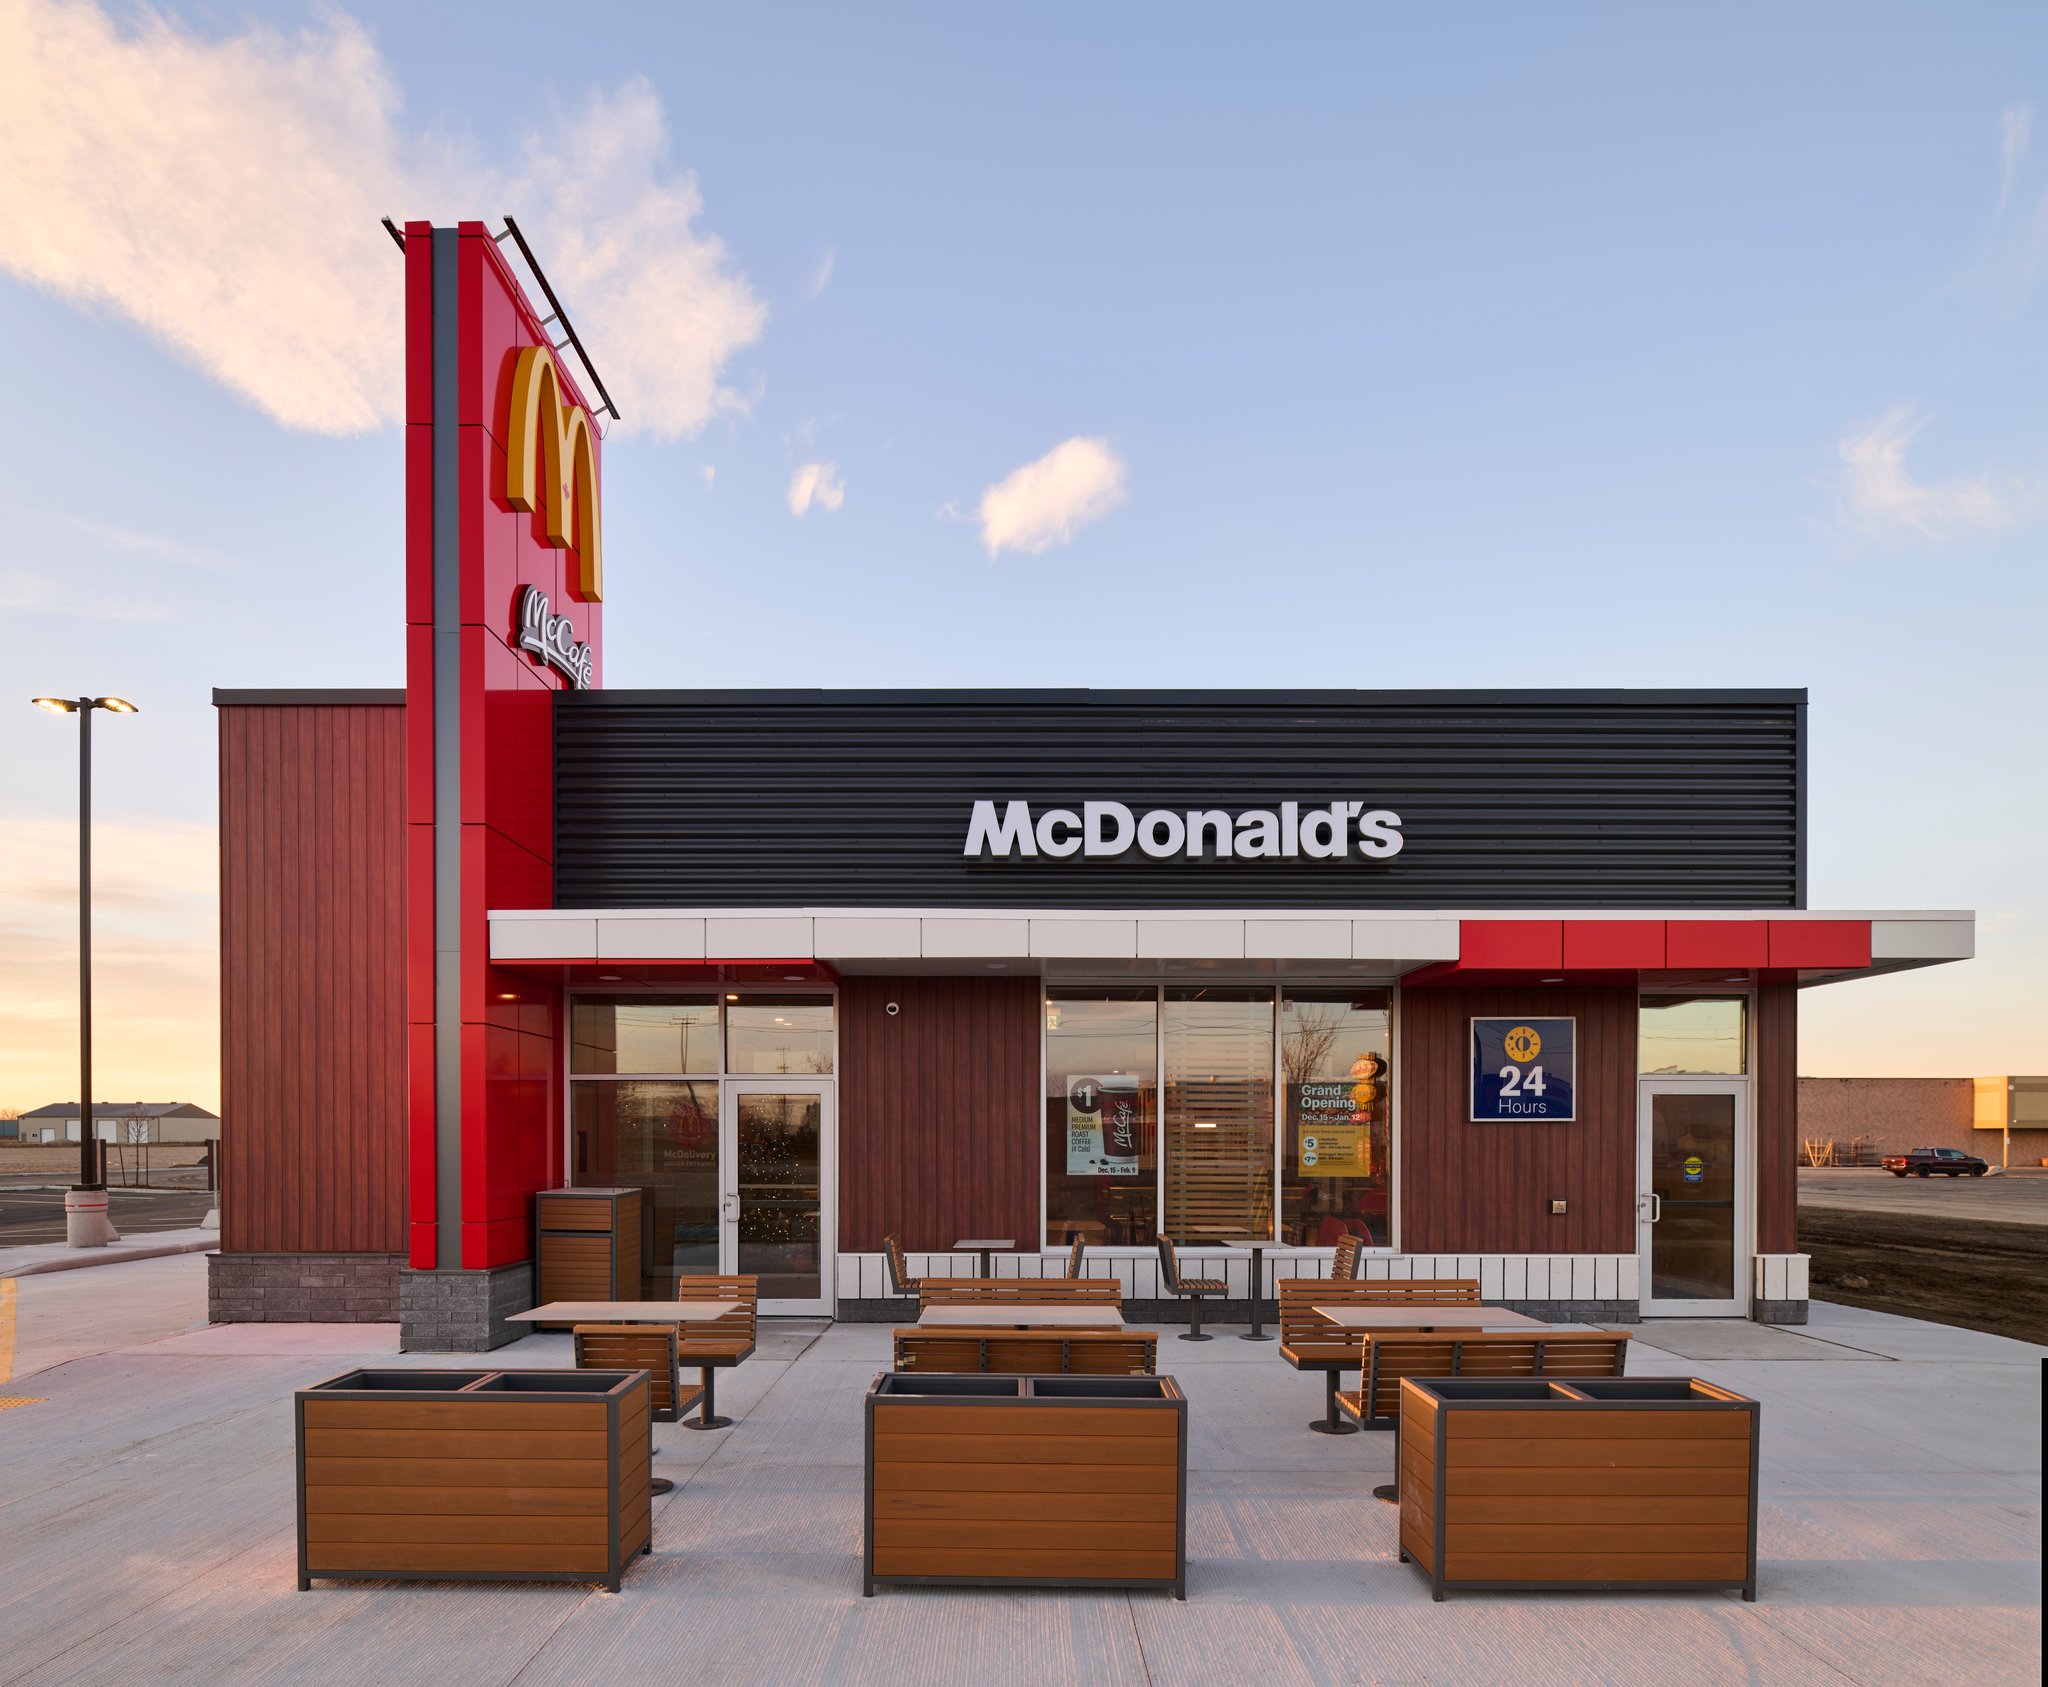 The following is a case study about a series of impressive architecture photography projects we completed for mcdonald's restaurants of canada limited. The projects took place in western ontario and were focused on new build properties. The goal of these photography projects was to capture interior shots and exterior shots of these modern buildings and to showcase mcdonald's latest concepts and designs.